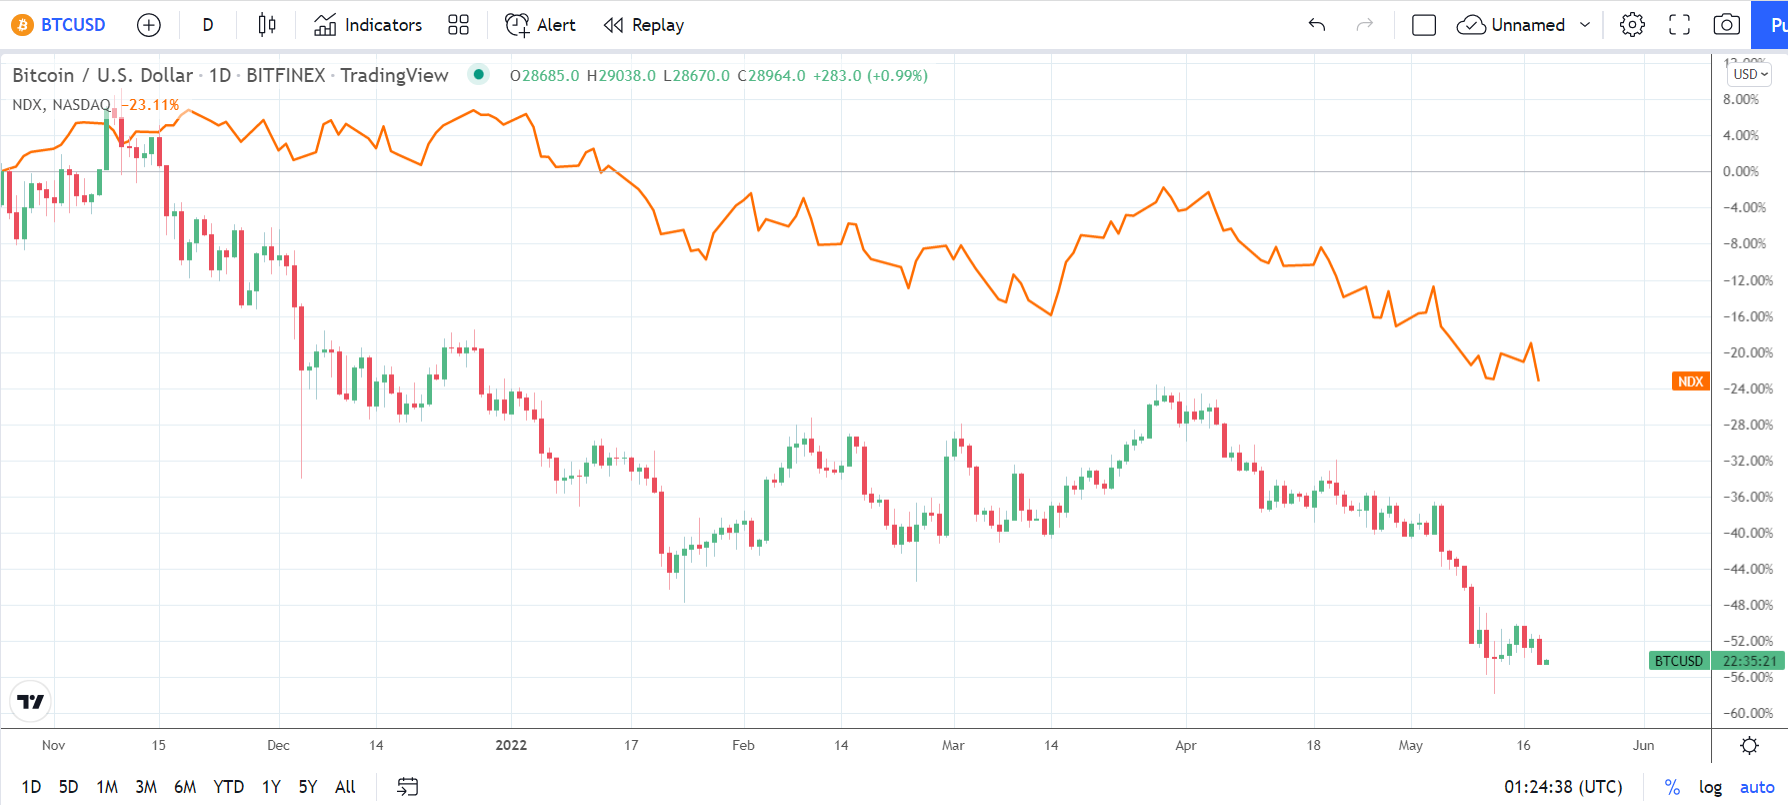 NASDAQ - BTC correlation strengthens as a result of hawkish Powell chatter.